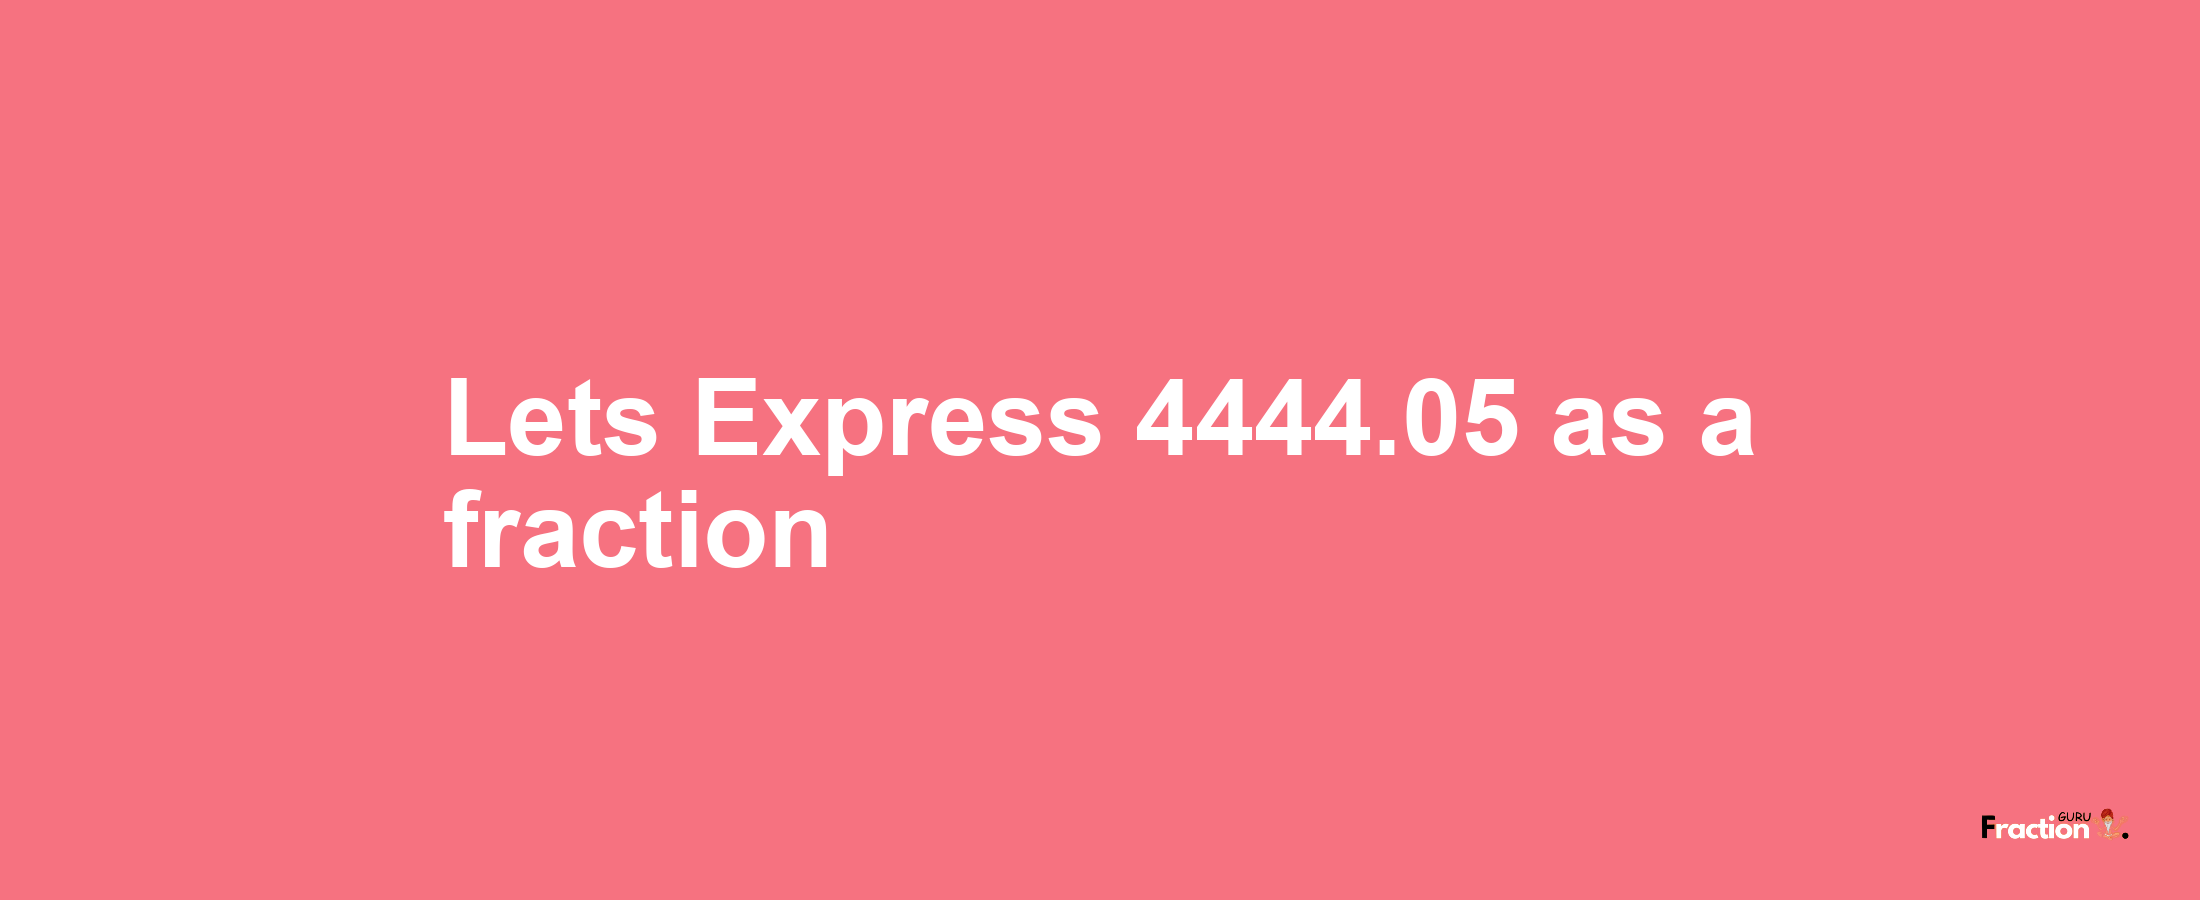 Lets Express 4444.05 as afraction